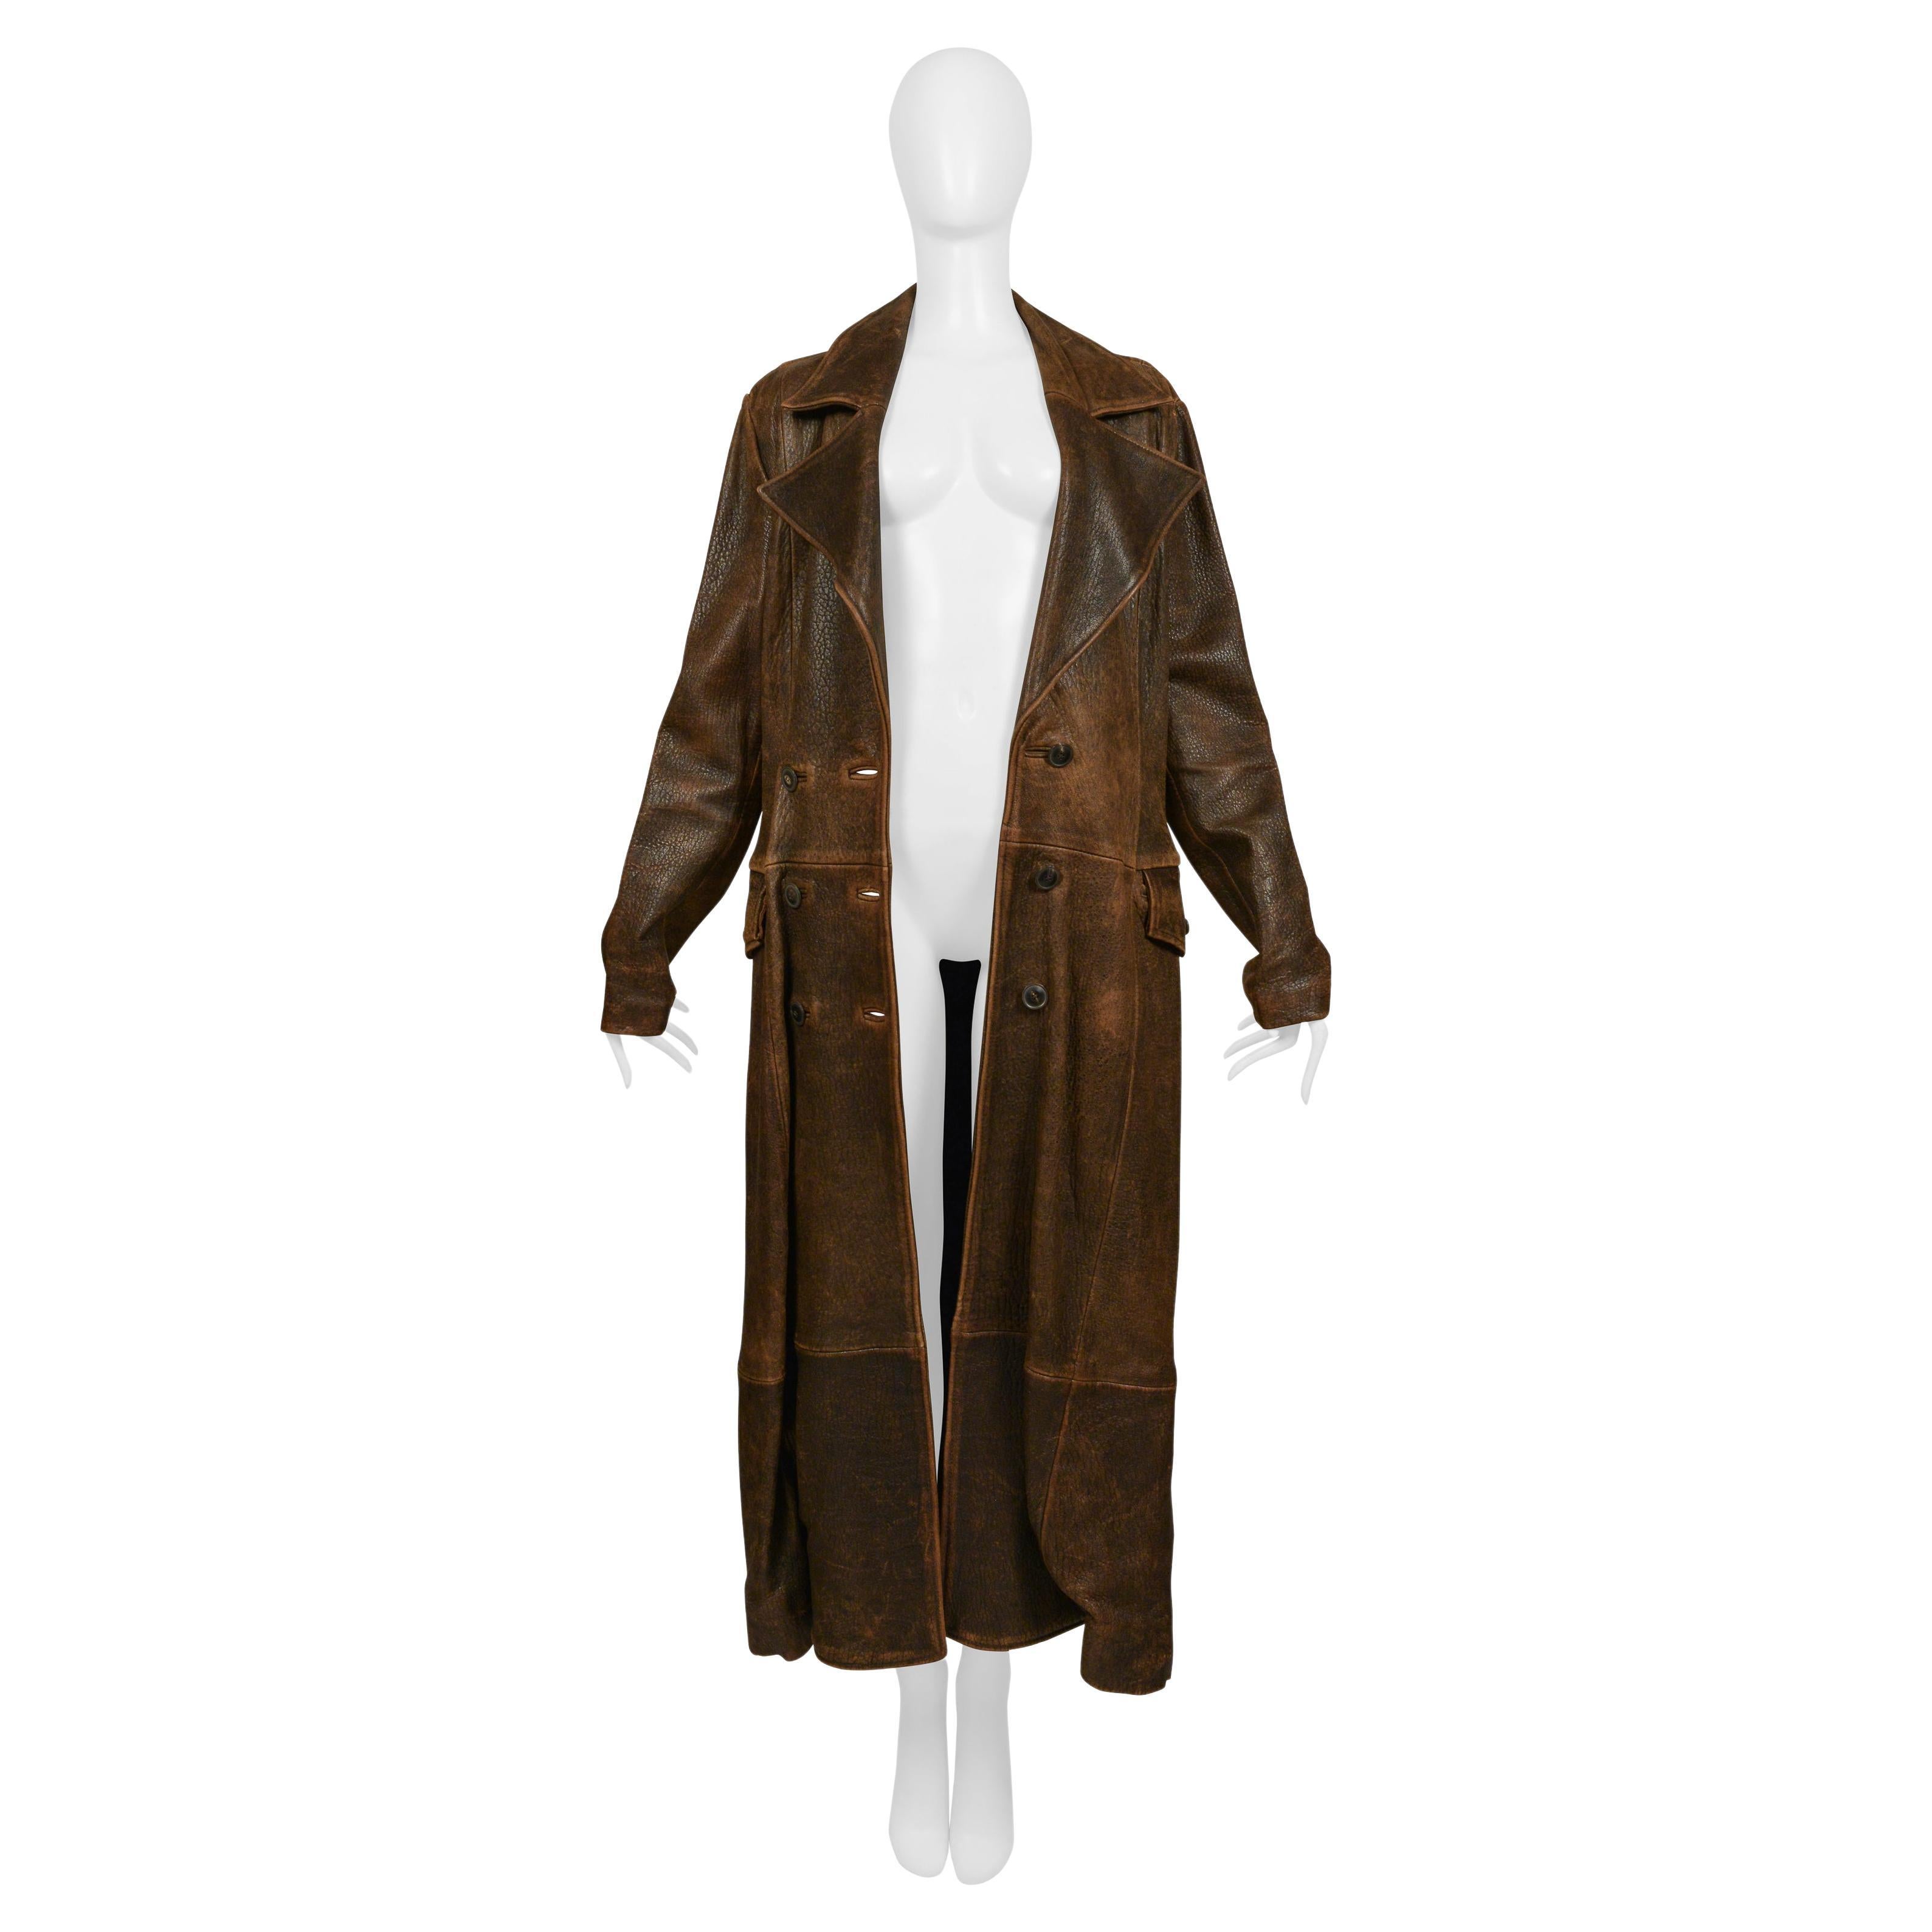 Resurrection is offering a vintage brown North Beach Leather aviator-style coat. The coat features a double-breasted front, an oversized collar, side flap pockets, a flattering low hip drop seam, full lining, and a floor-length design.
* North Beach